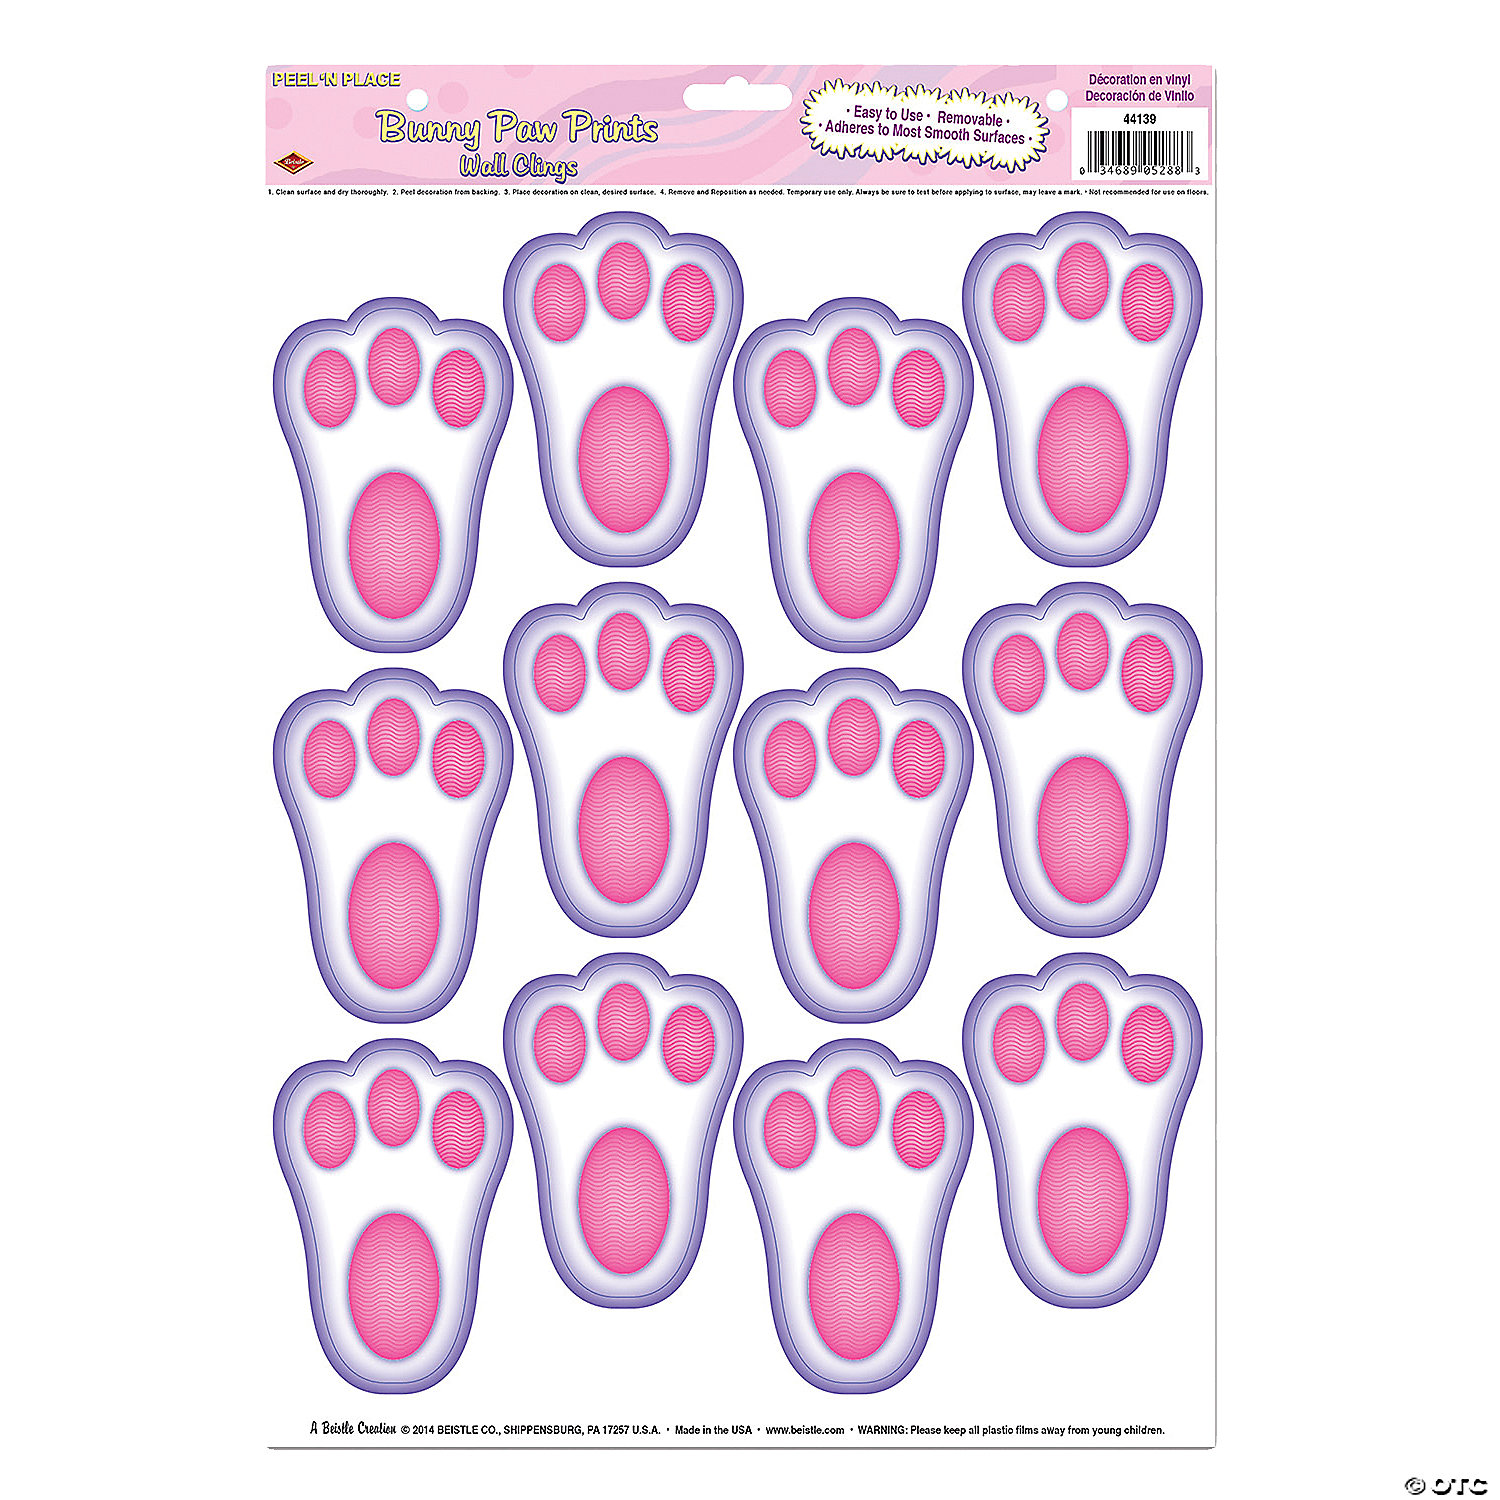 EASTER BUNNY PAW PRINTS WINDOW CLINGS - EASTER